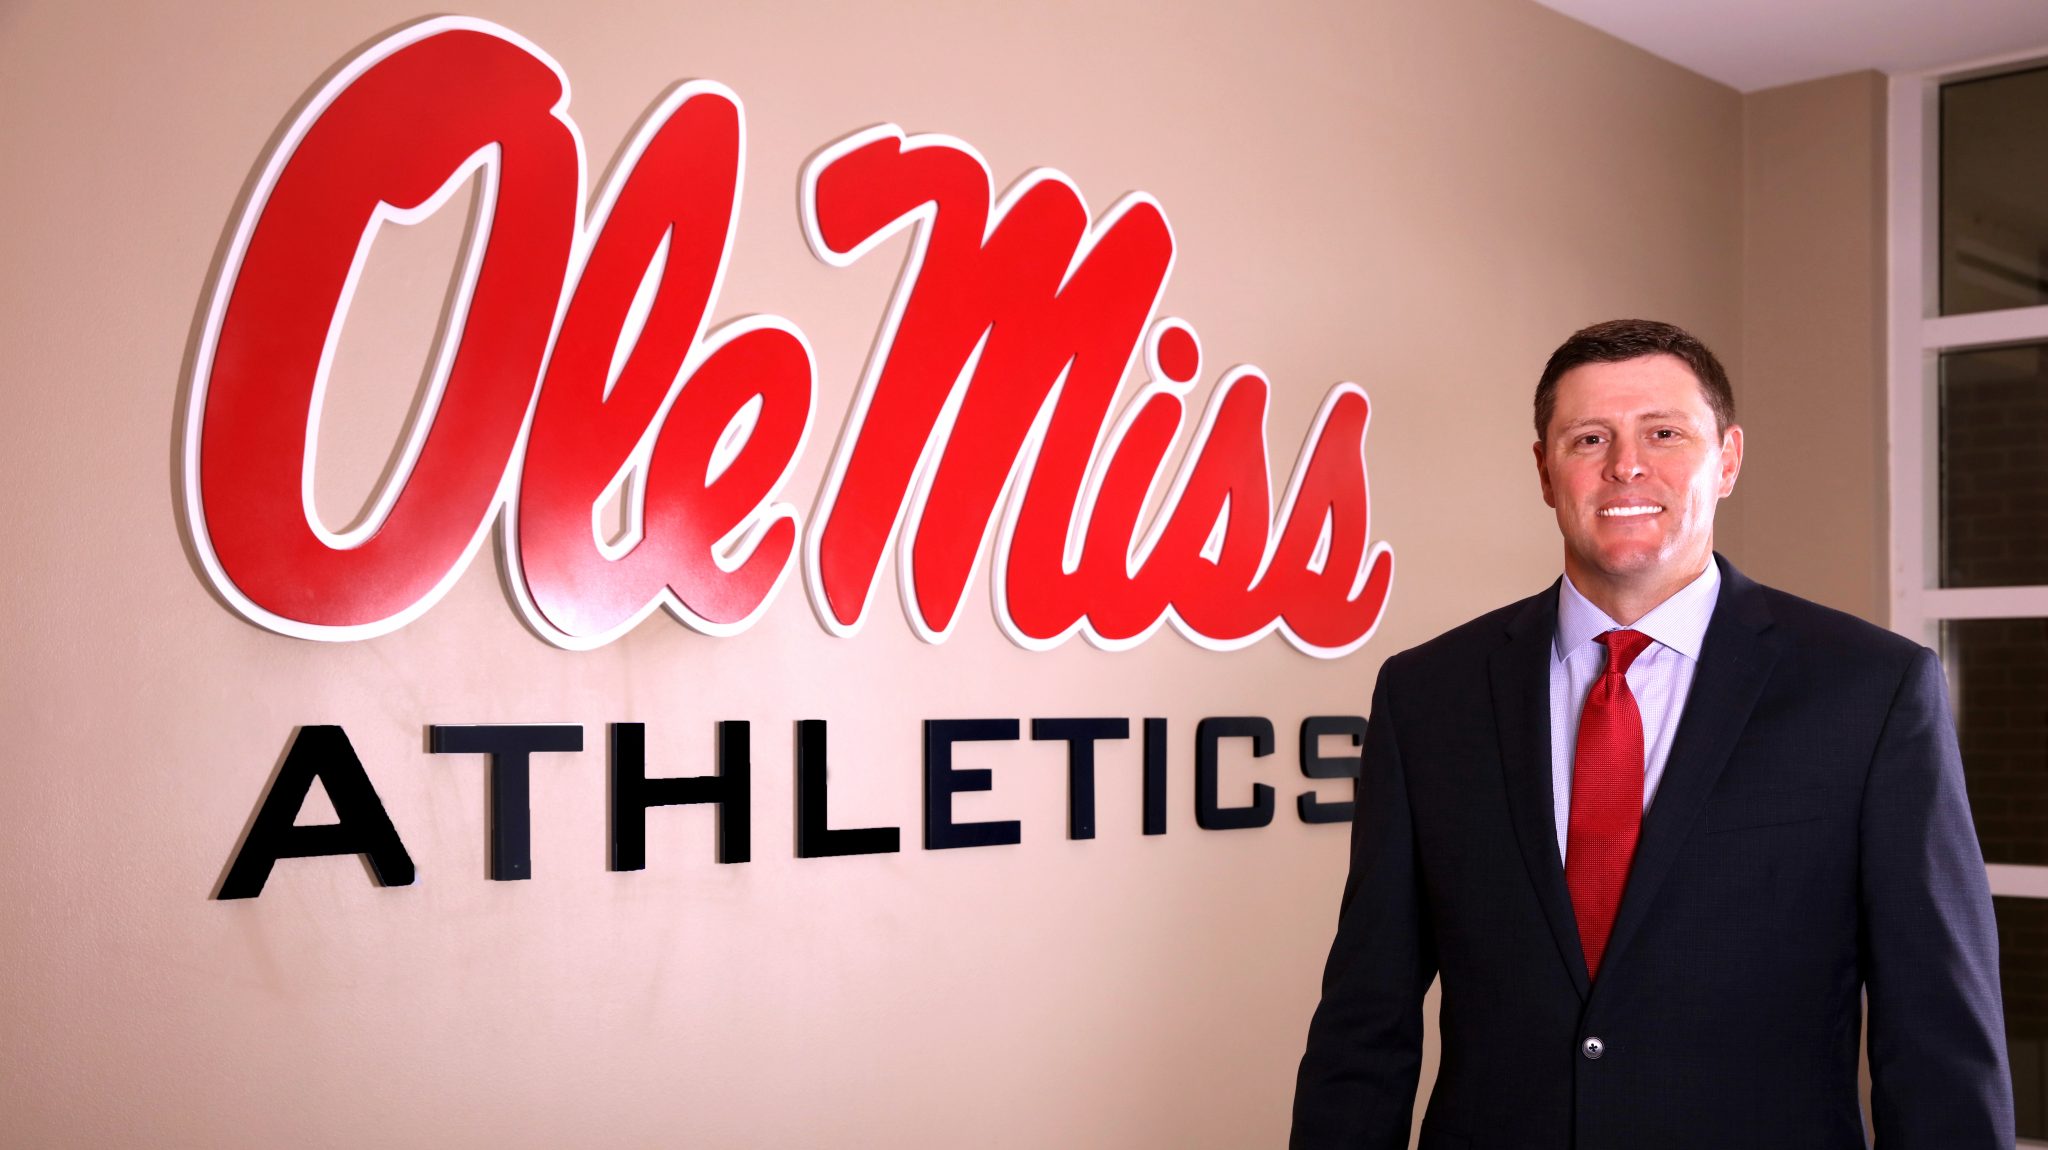 Keith Carter was named Ole Miss' Vice Chancellor for Intercollegiate Athletics on Friday, Nov. 22, 2019. Photo by Joshua McCoy/Ole Miss Athletics